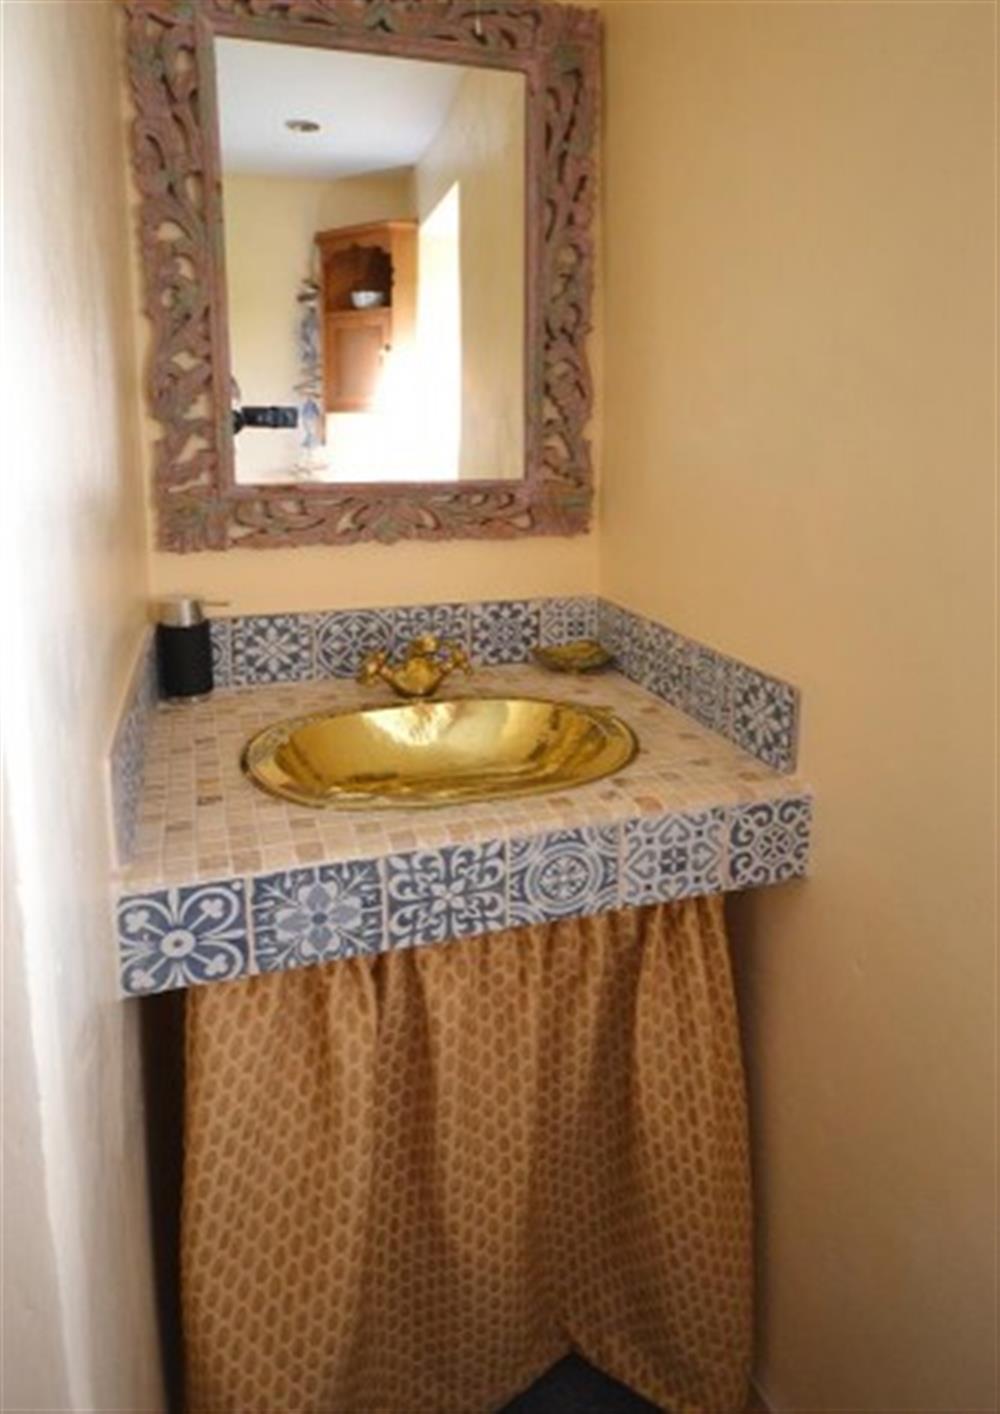 There are features of interest like this Moroccan sink at Little Perhay in Bridport